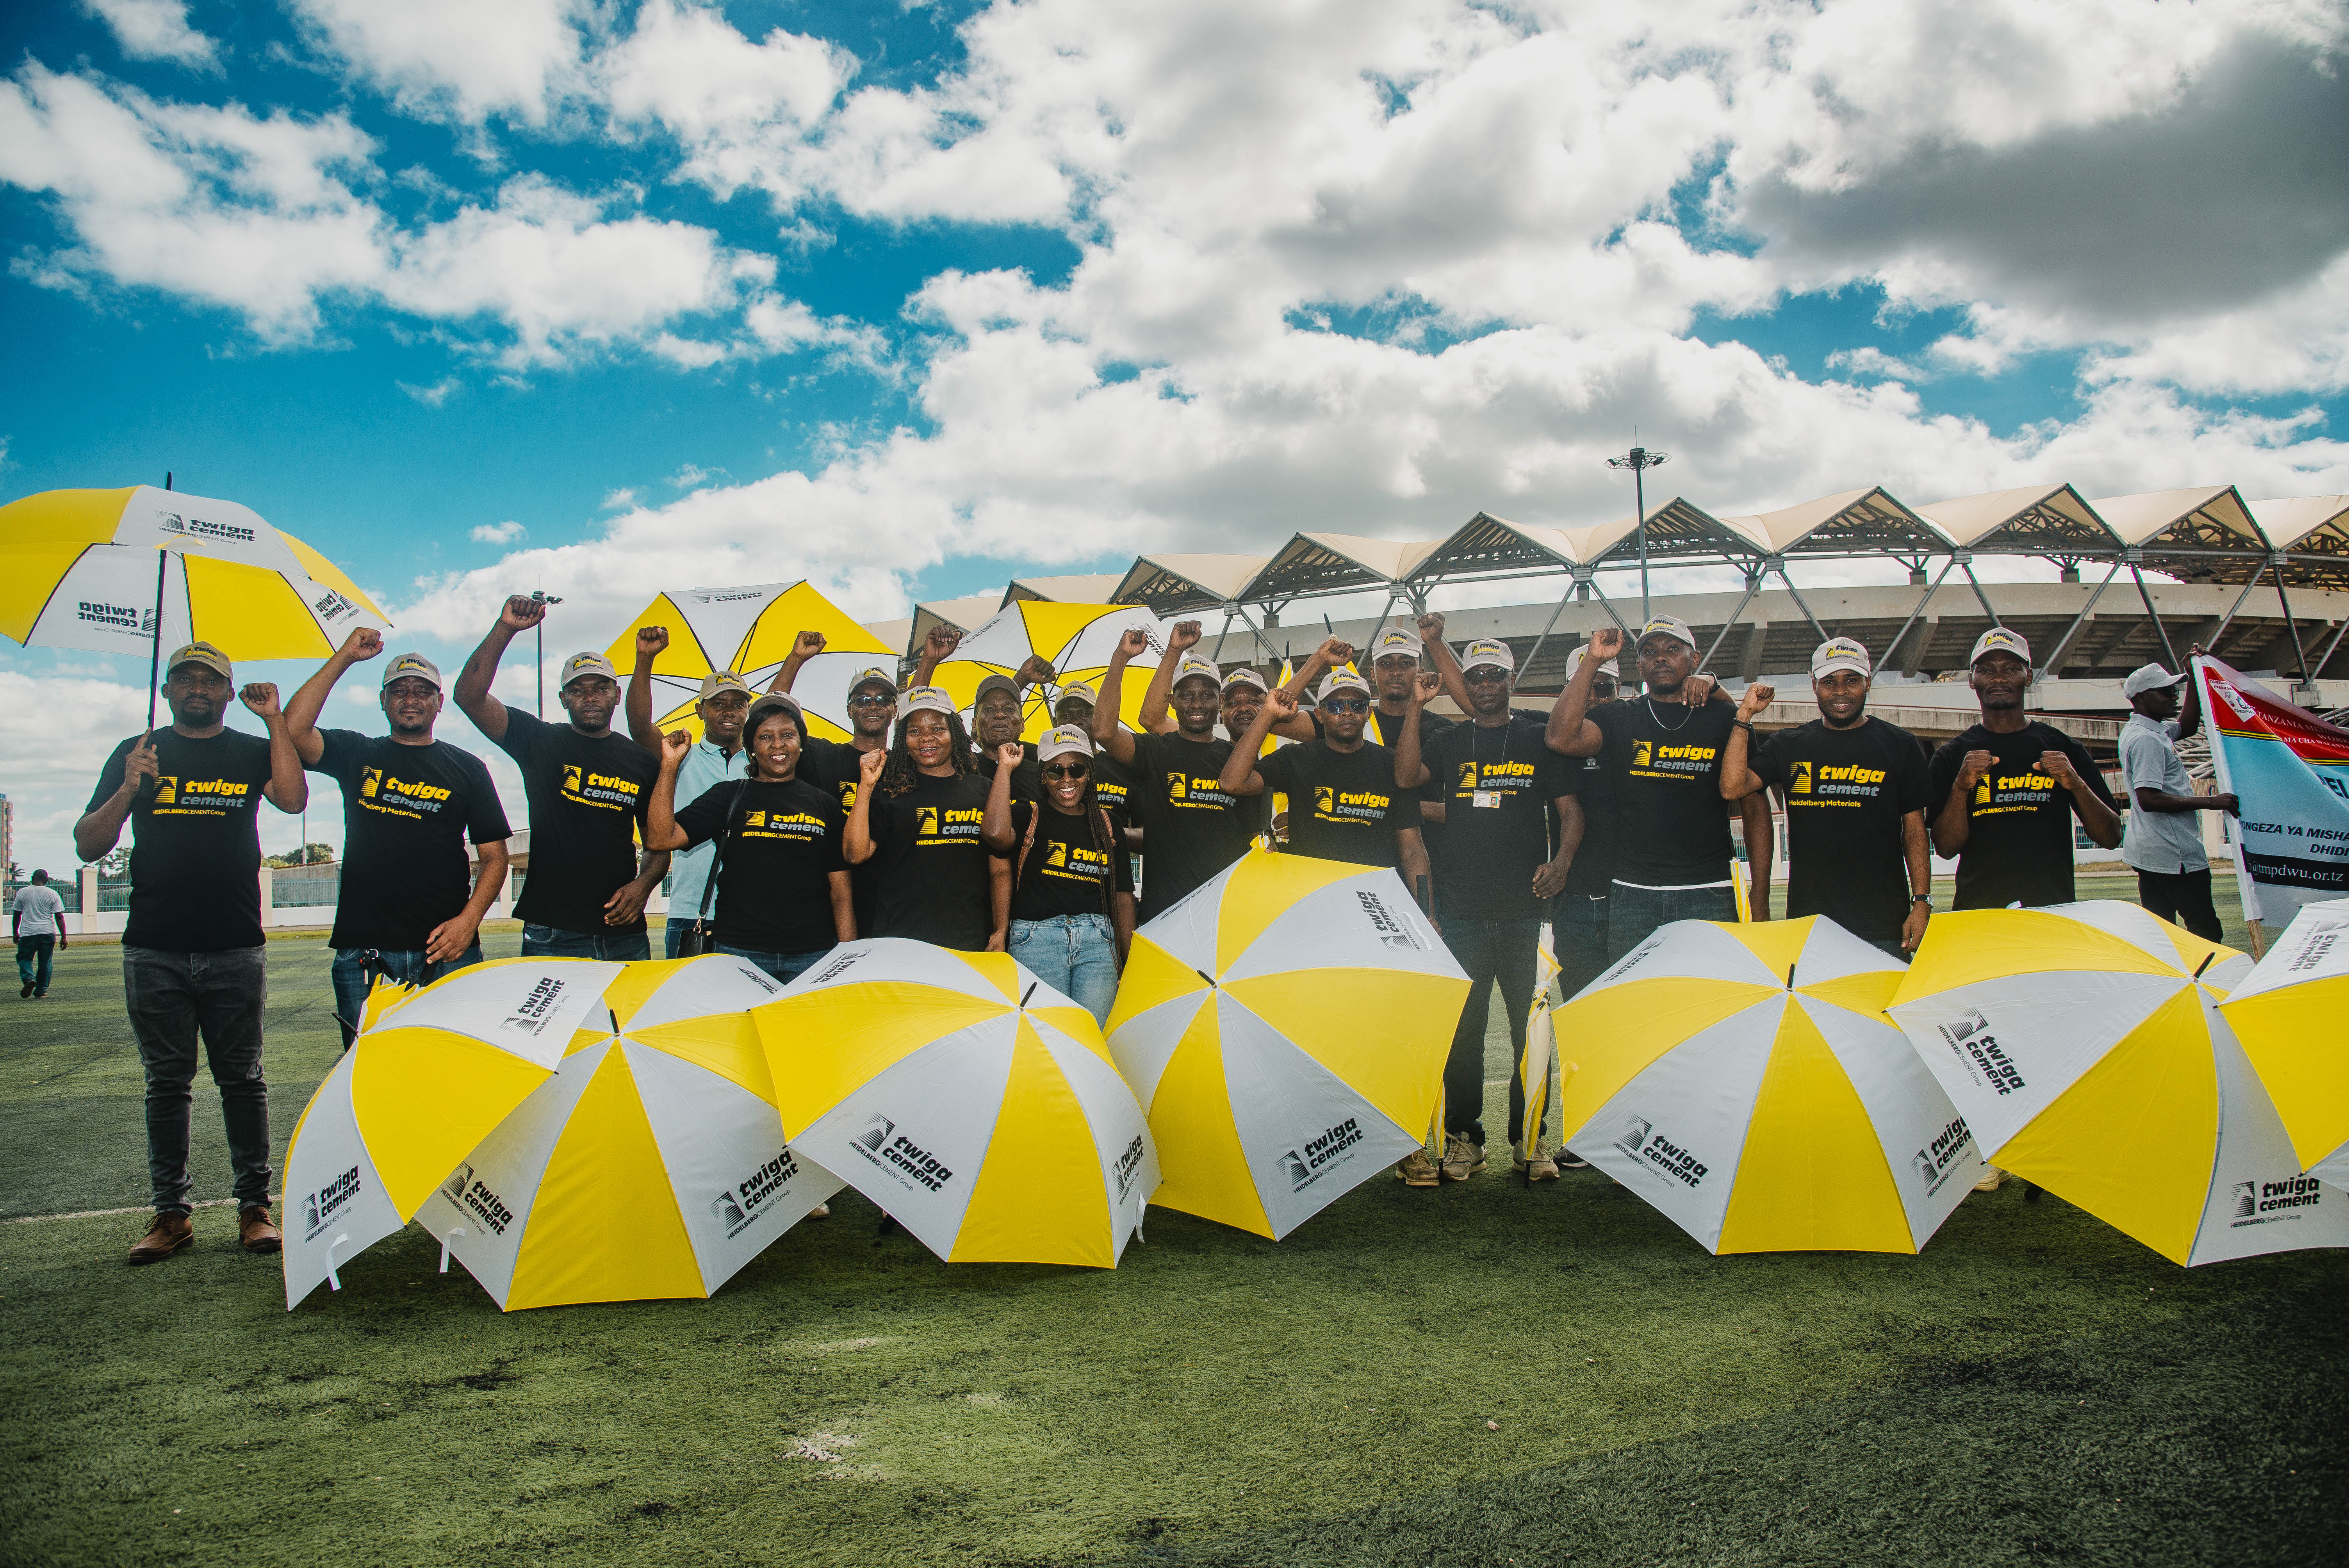 Group of people with yellow and white umbrellas